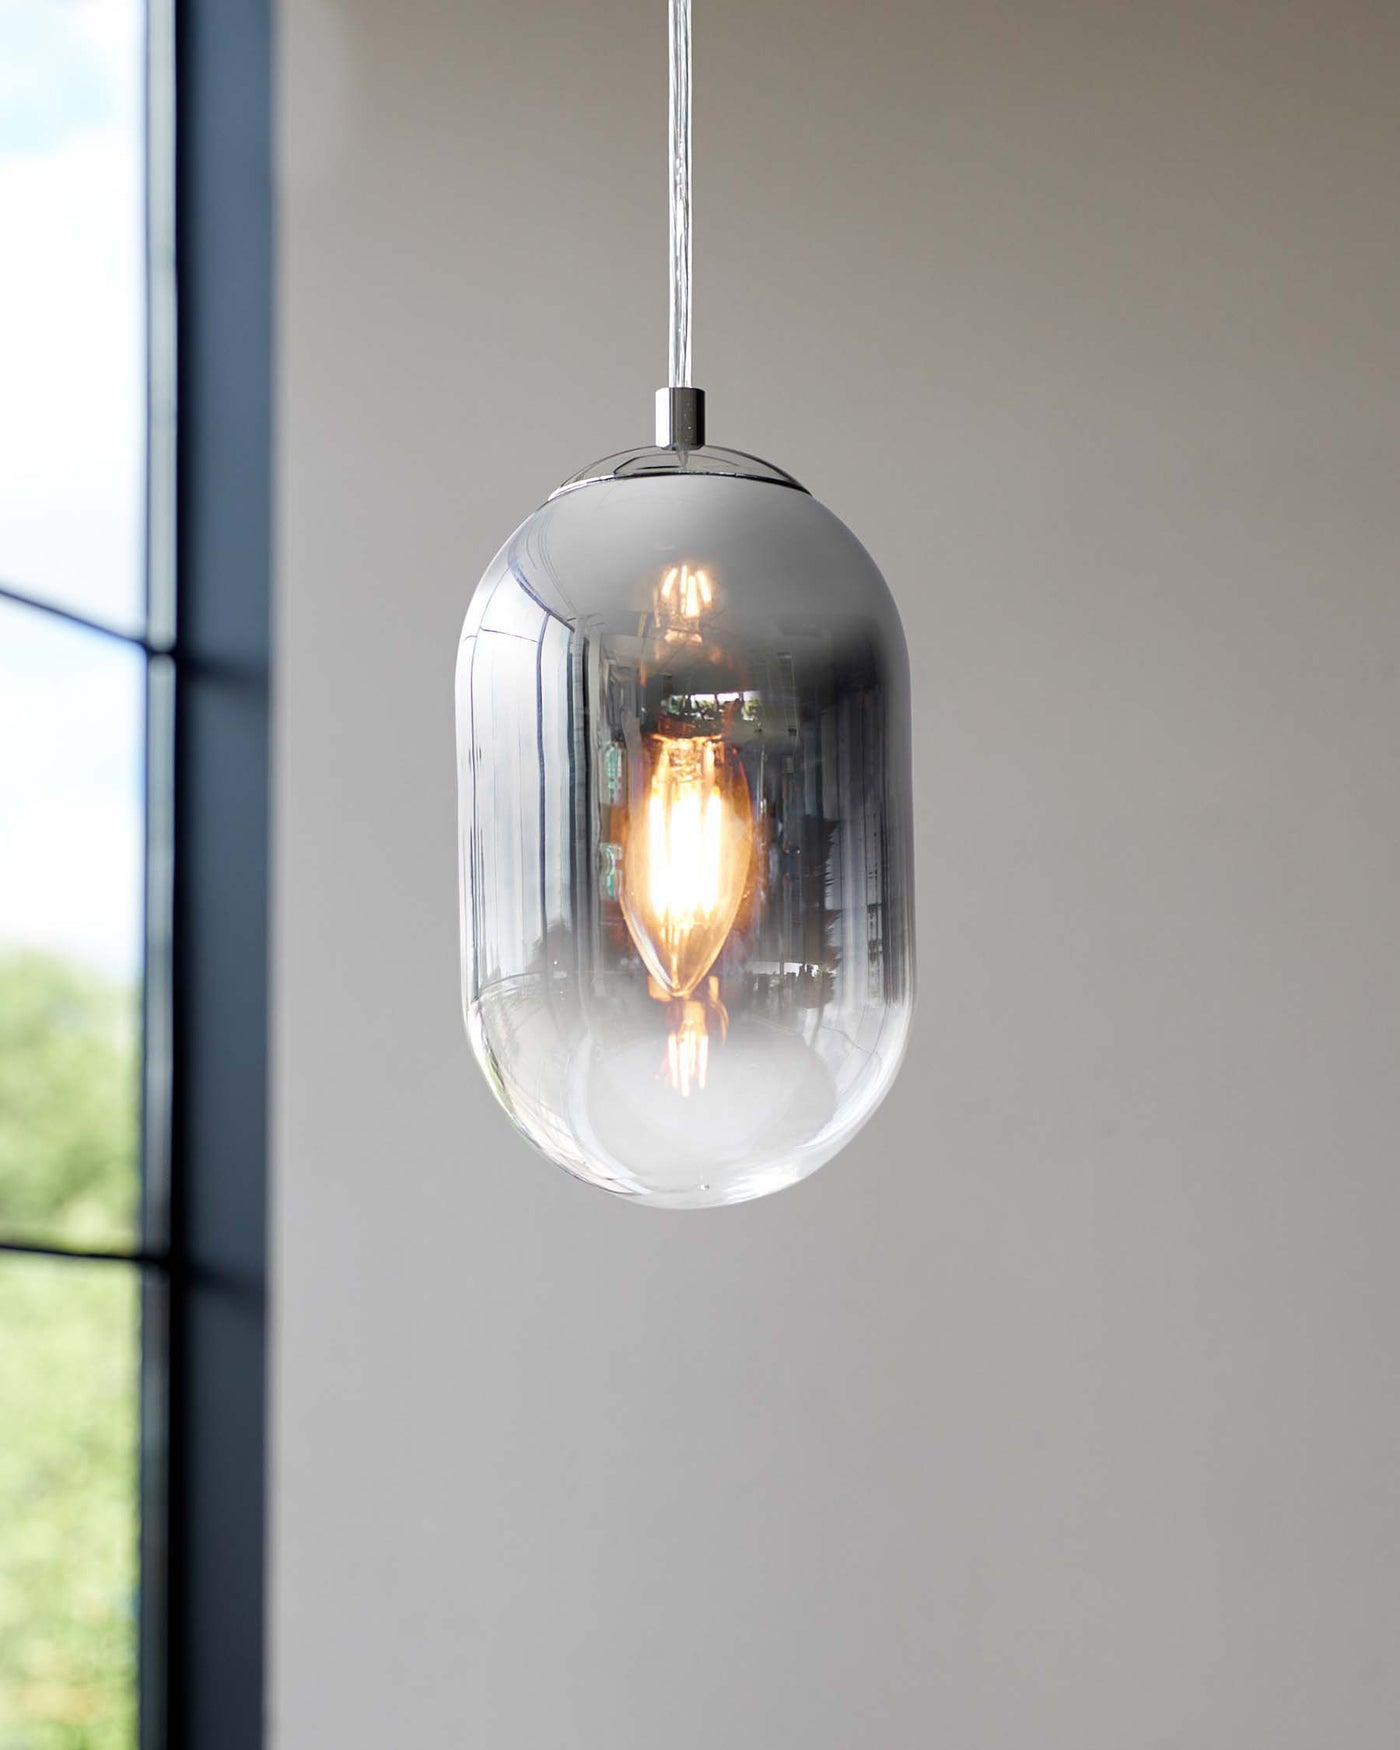 Suspended pendant light with a sleek chrome finish featuring an elongated clear glass shade encasing a visible filament bulb, set against a soft grey background near a window.